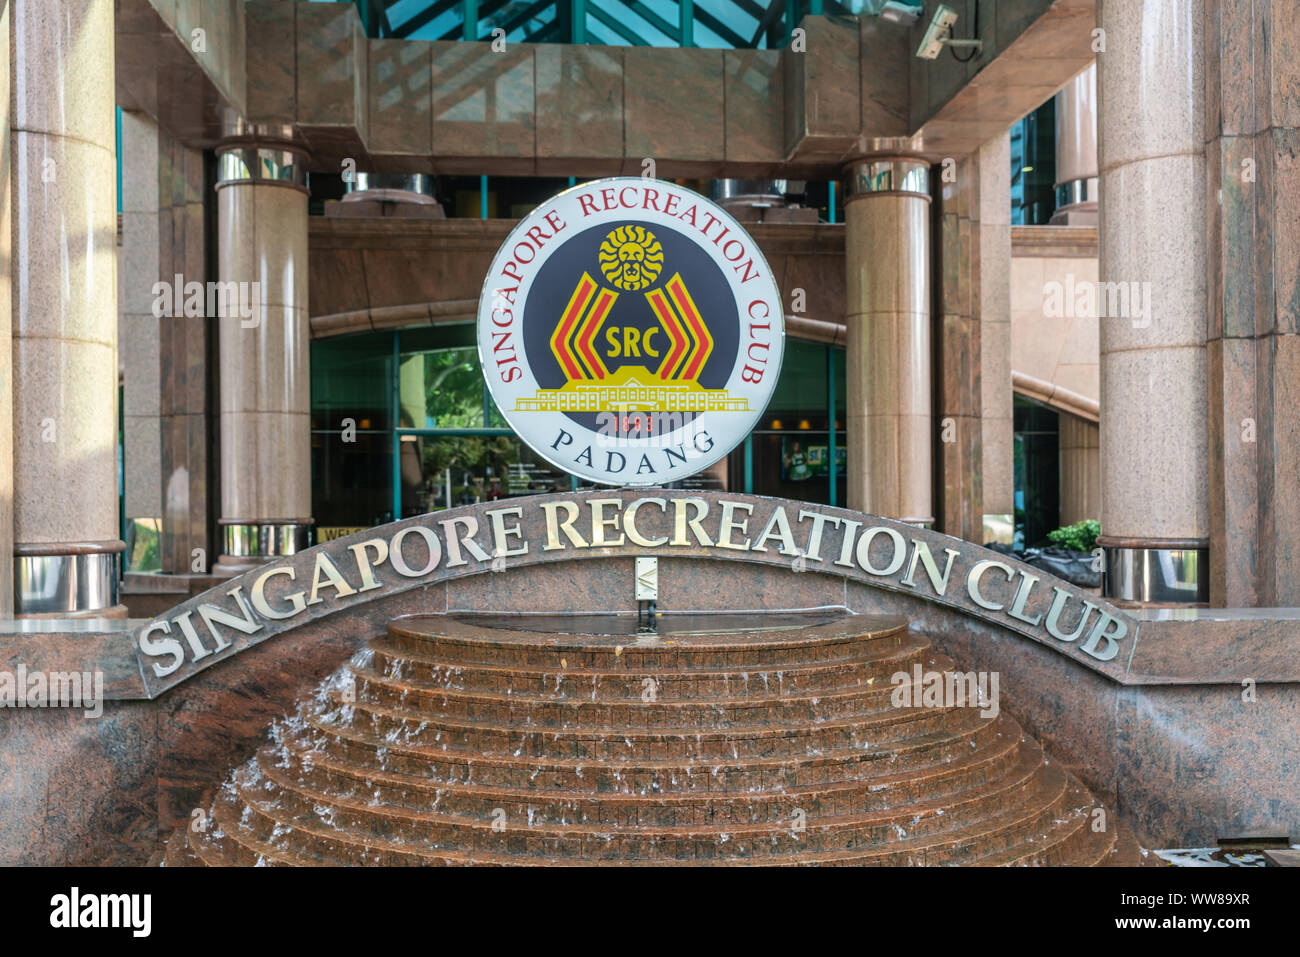 Singapore - March 20, 2019: Closeup of sign standing on fountain at entrance of Singapore Recreation Club, called Padang with its Cricket Club among o Stock Photo